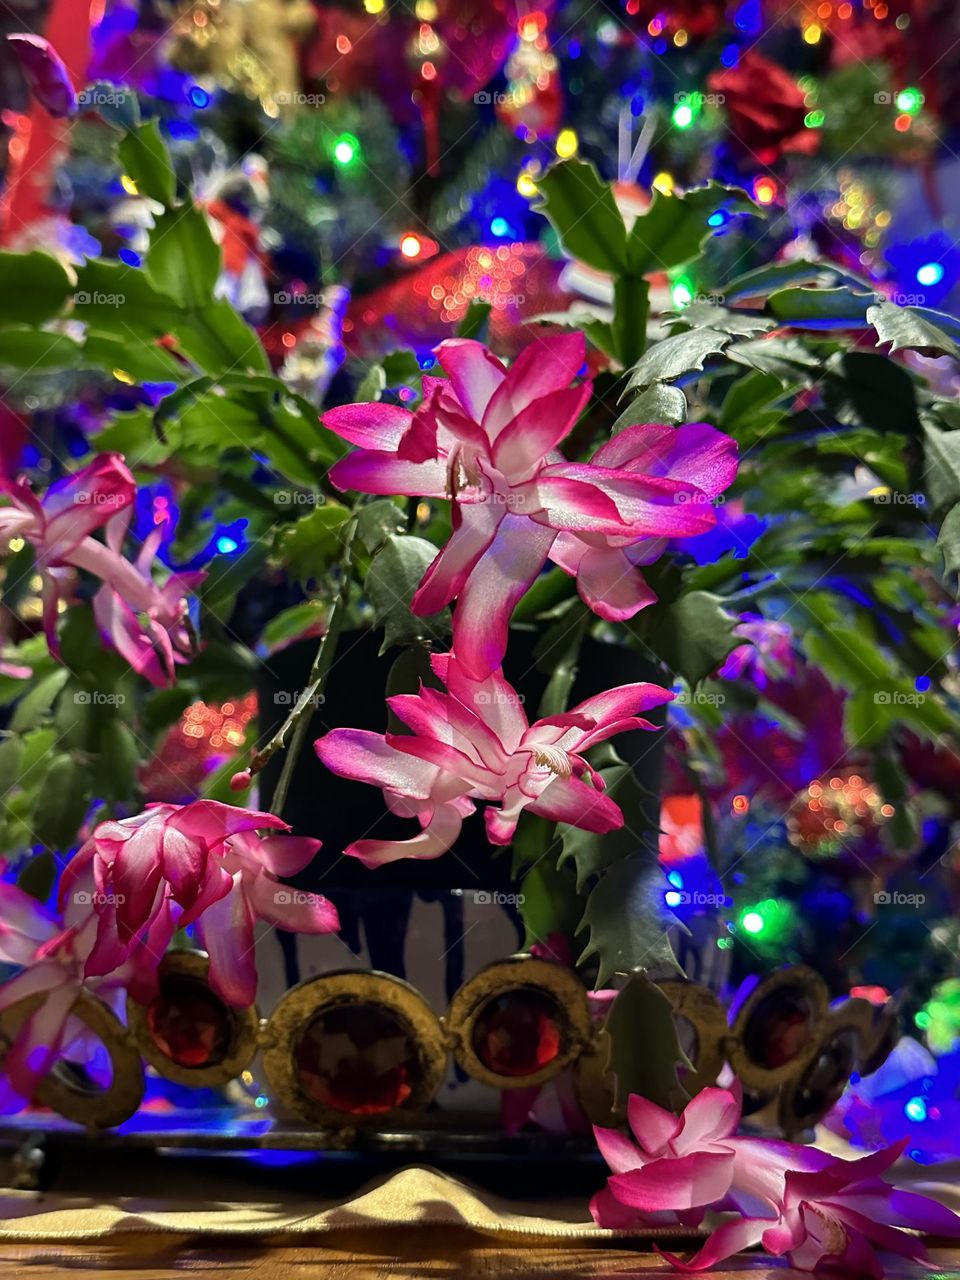 Plants of the Year! - The Christmas cactus is a long-lasting holiday plant that flowers in winter with colorful, tubular flowers in pink or lilac colors. They are also long-lived and can live up to 50 years or more. 